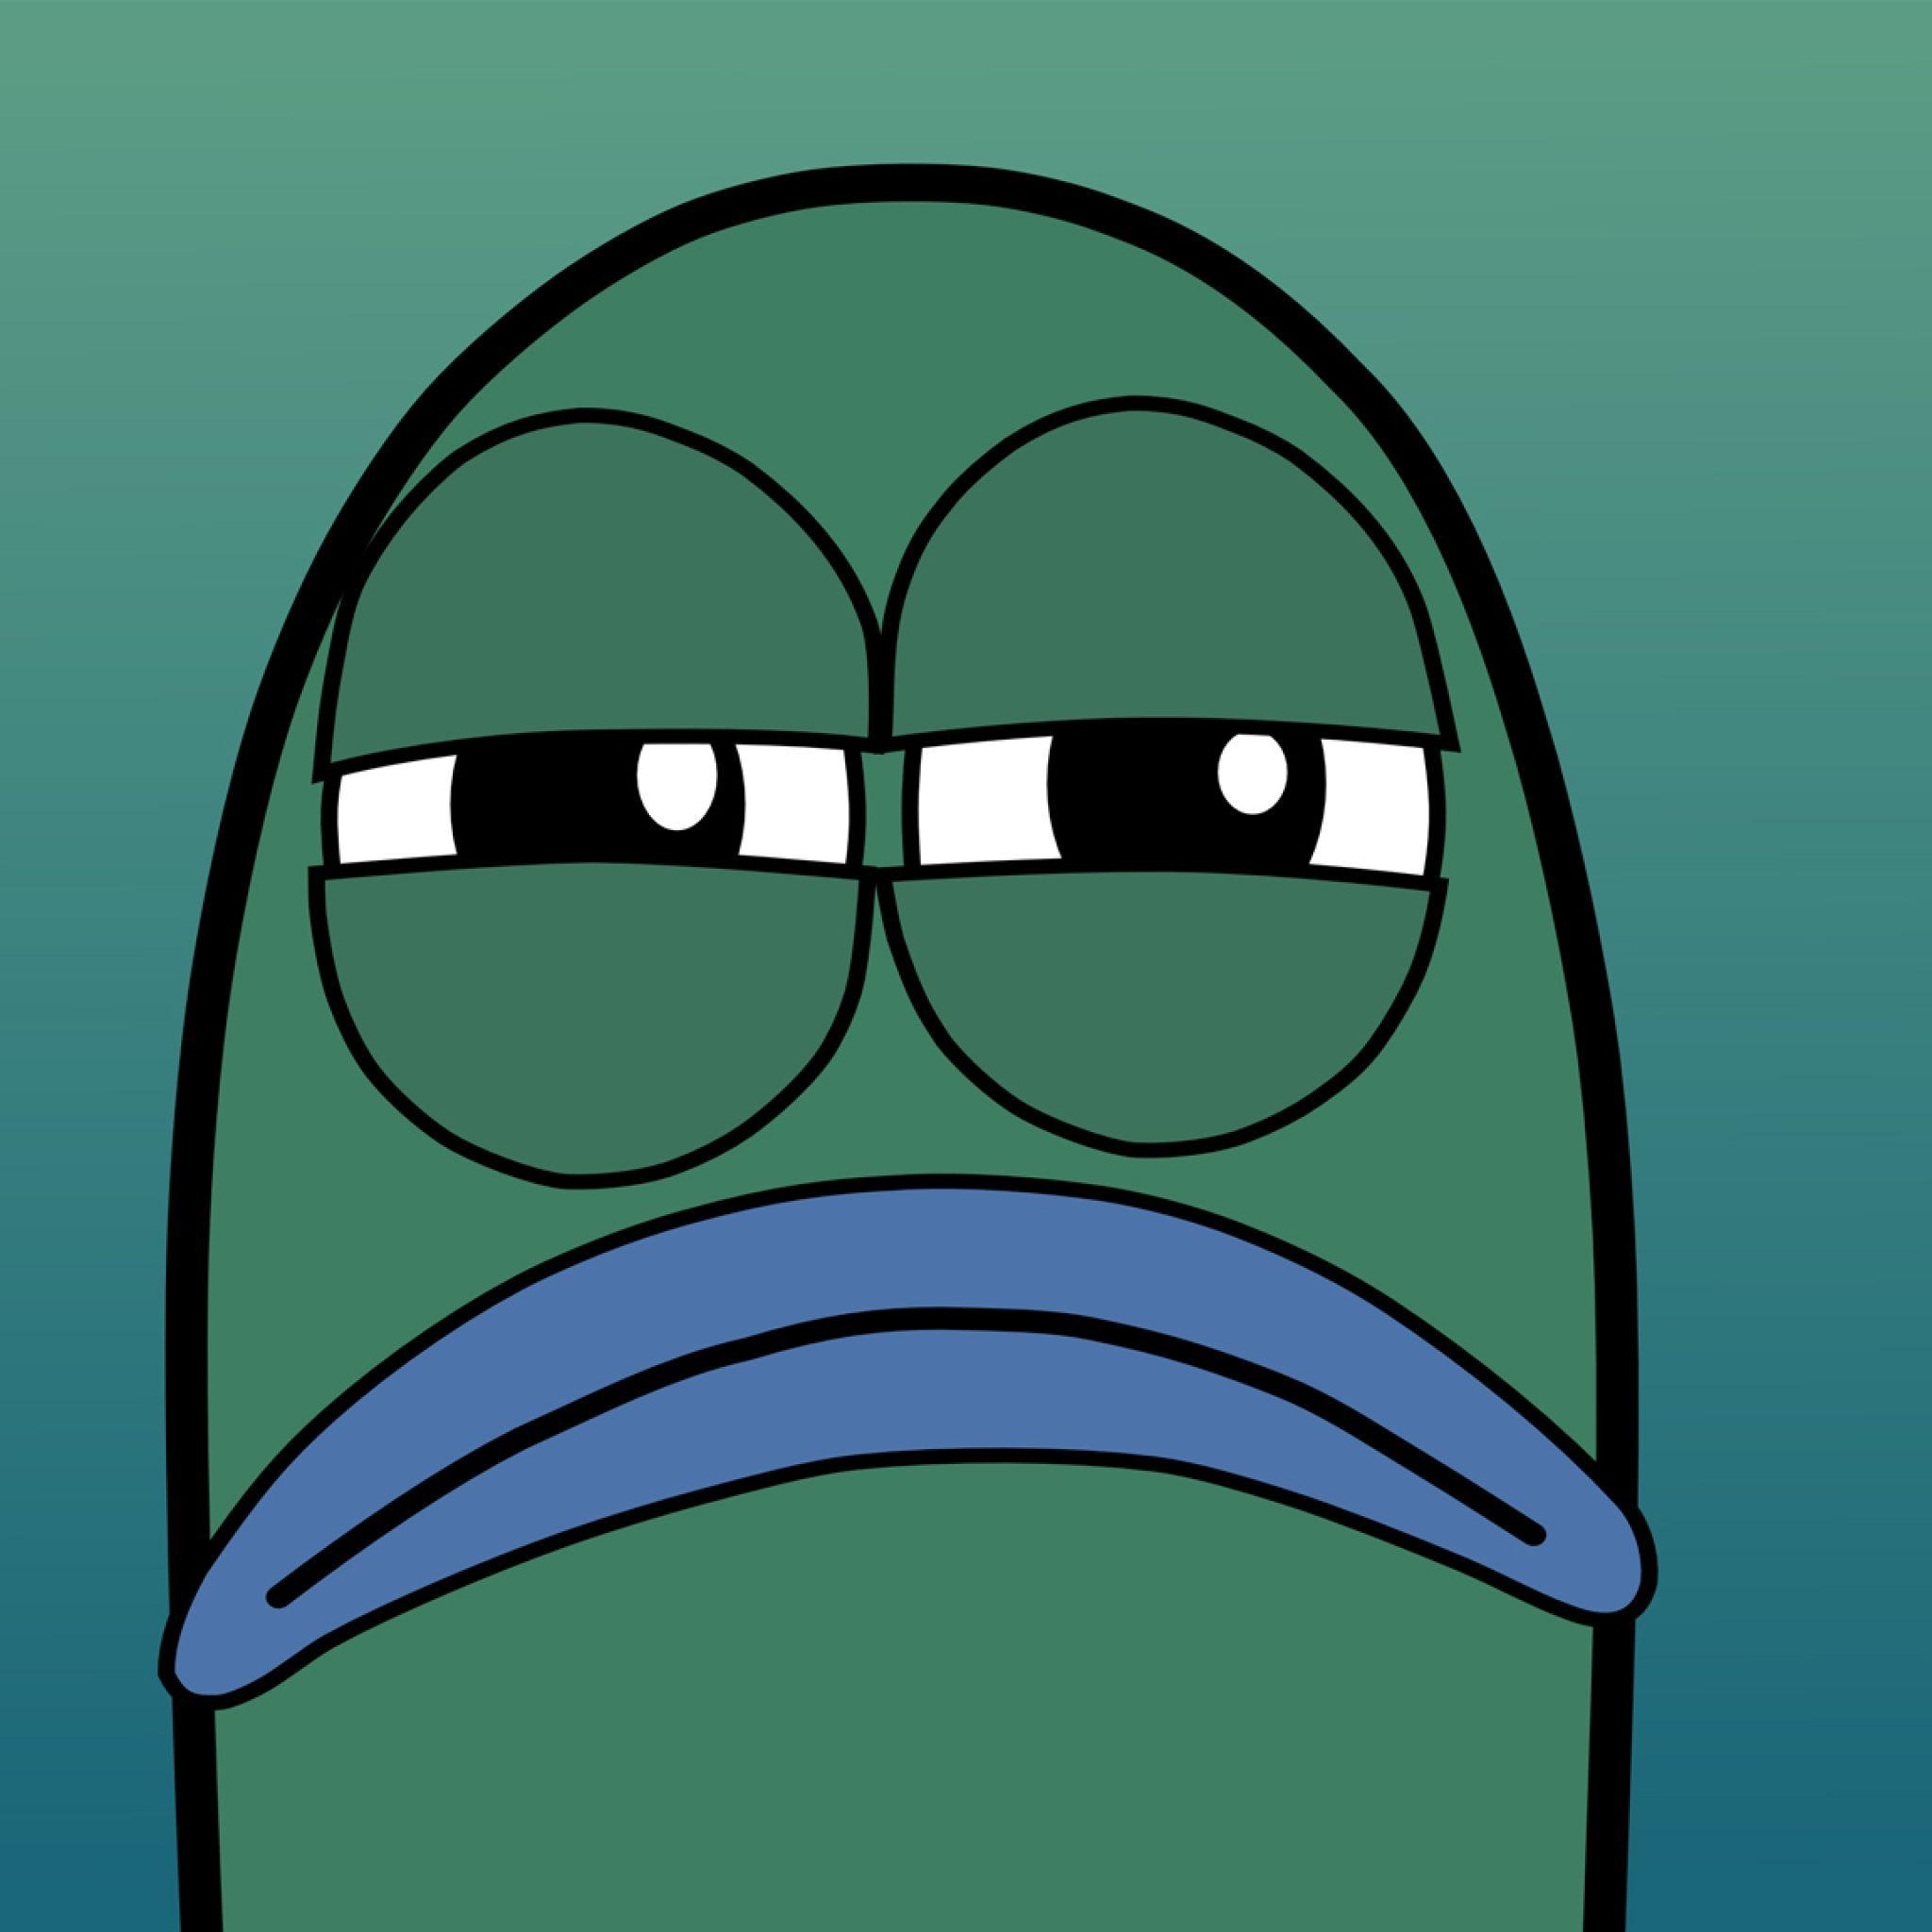 Sad Funny Cute Plankton Face! to see more simple jokes